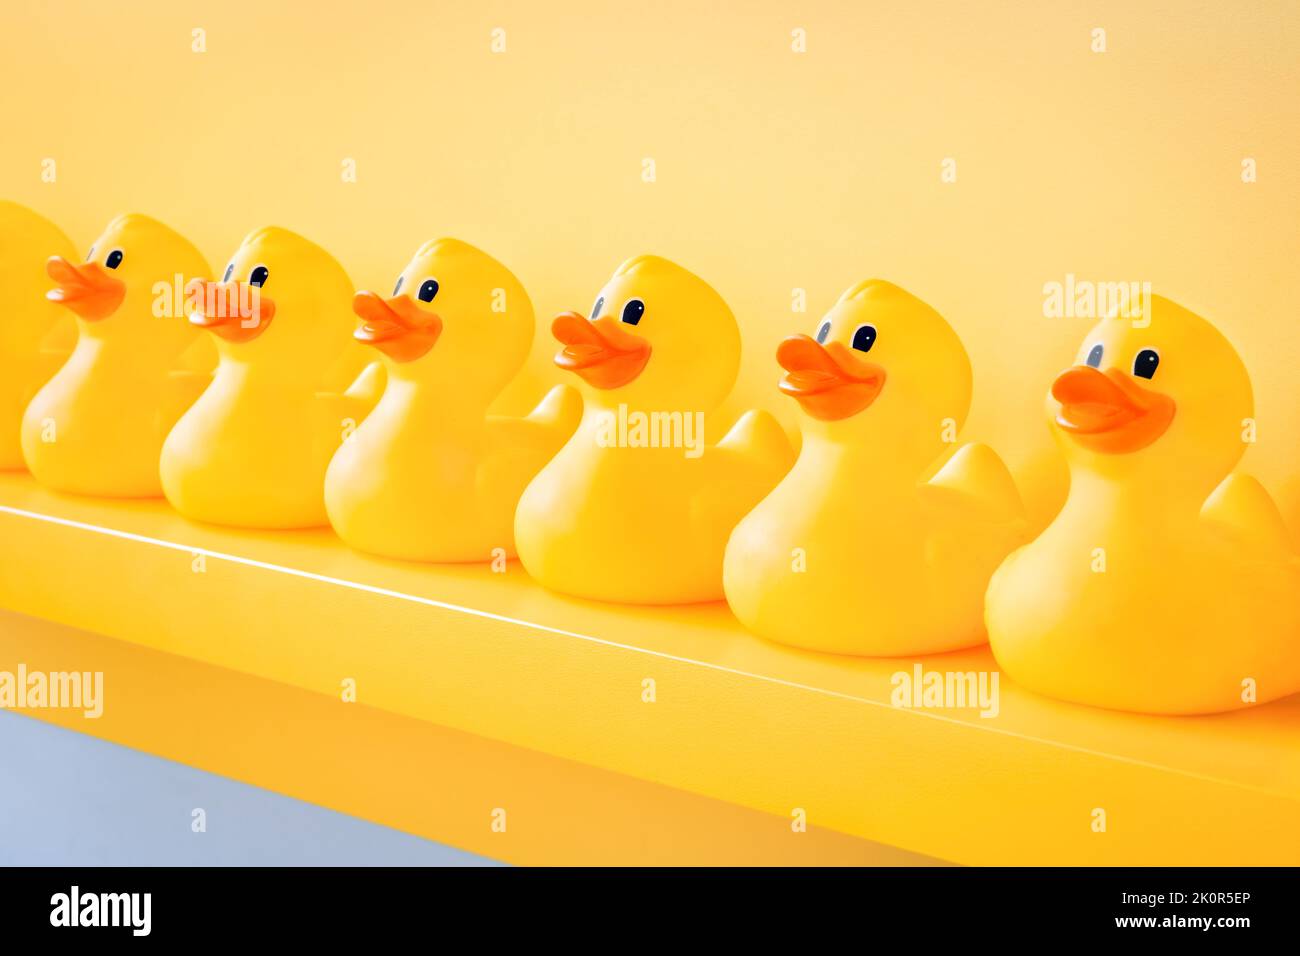 Yellow rubber ducks in a line toy design yellow concept team. Rubber duck background team meeting. Rubber ducky bath toy background yellow ducks in a Stock Photo